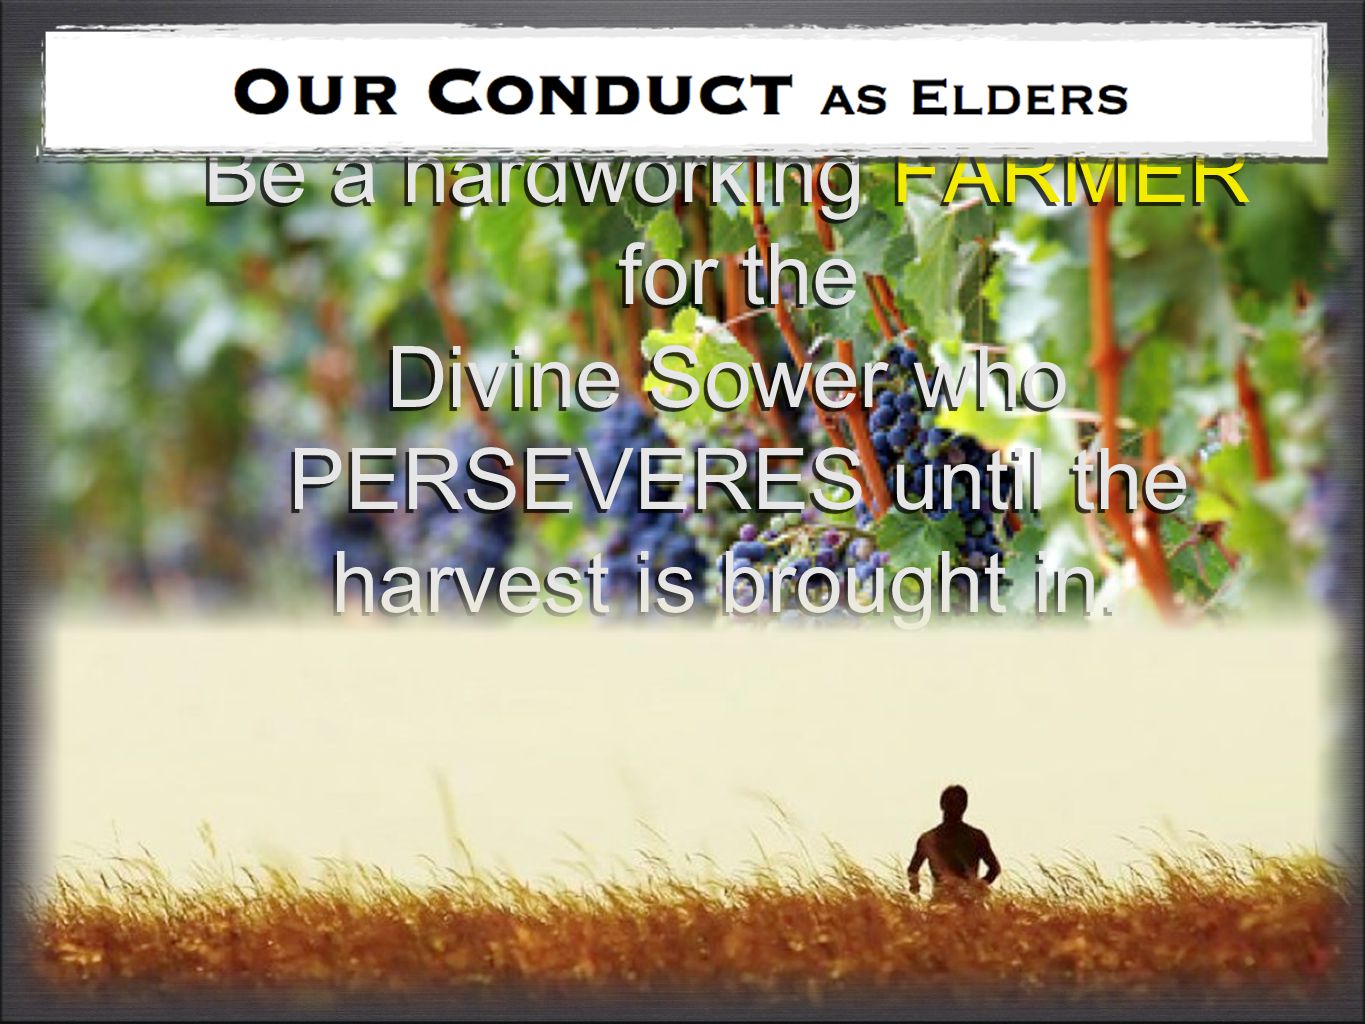 Be a hardworking FARMER for the Divine Sower who PERSEVERES until the harvest is brought in.